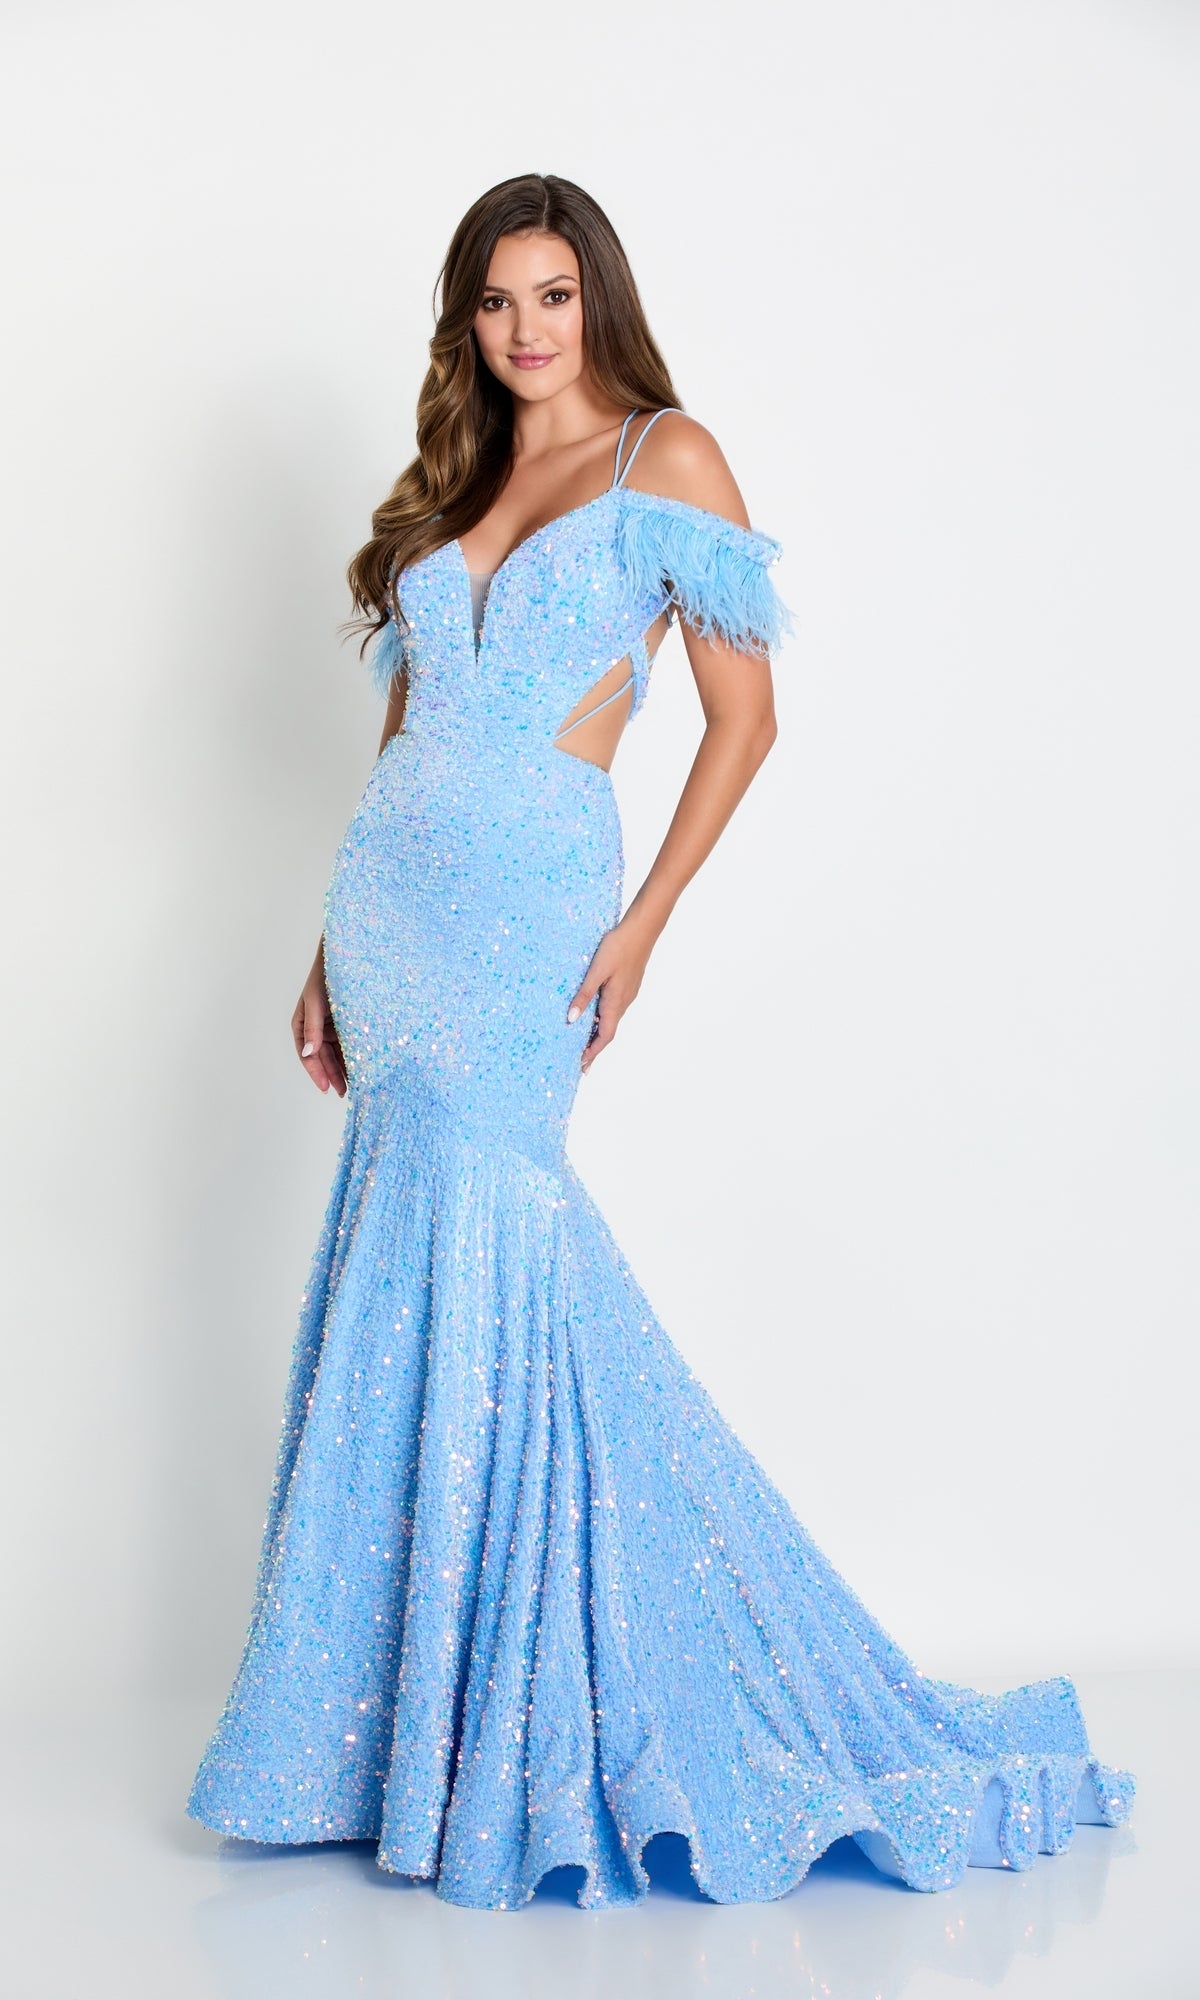 Long Sequin Cut-Out Prom Dress with Feathers